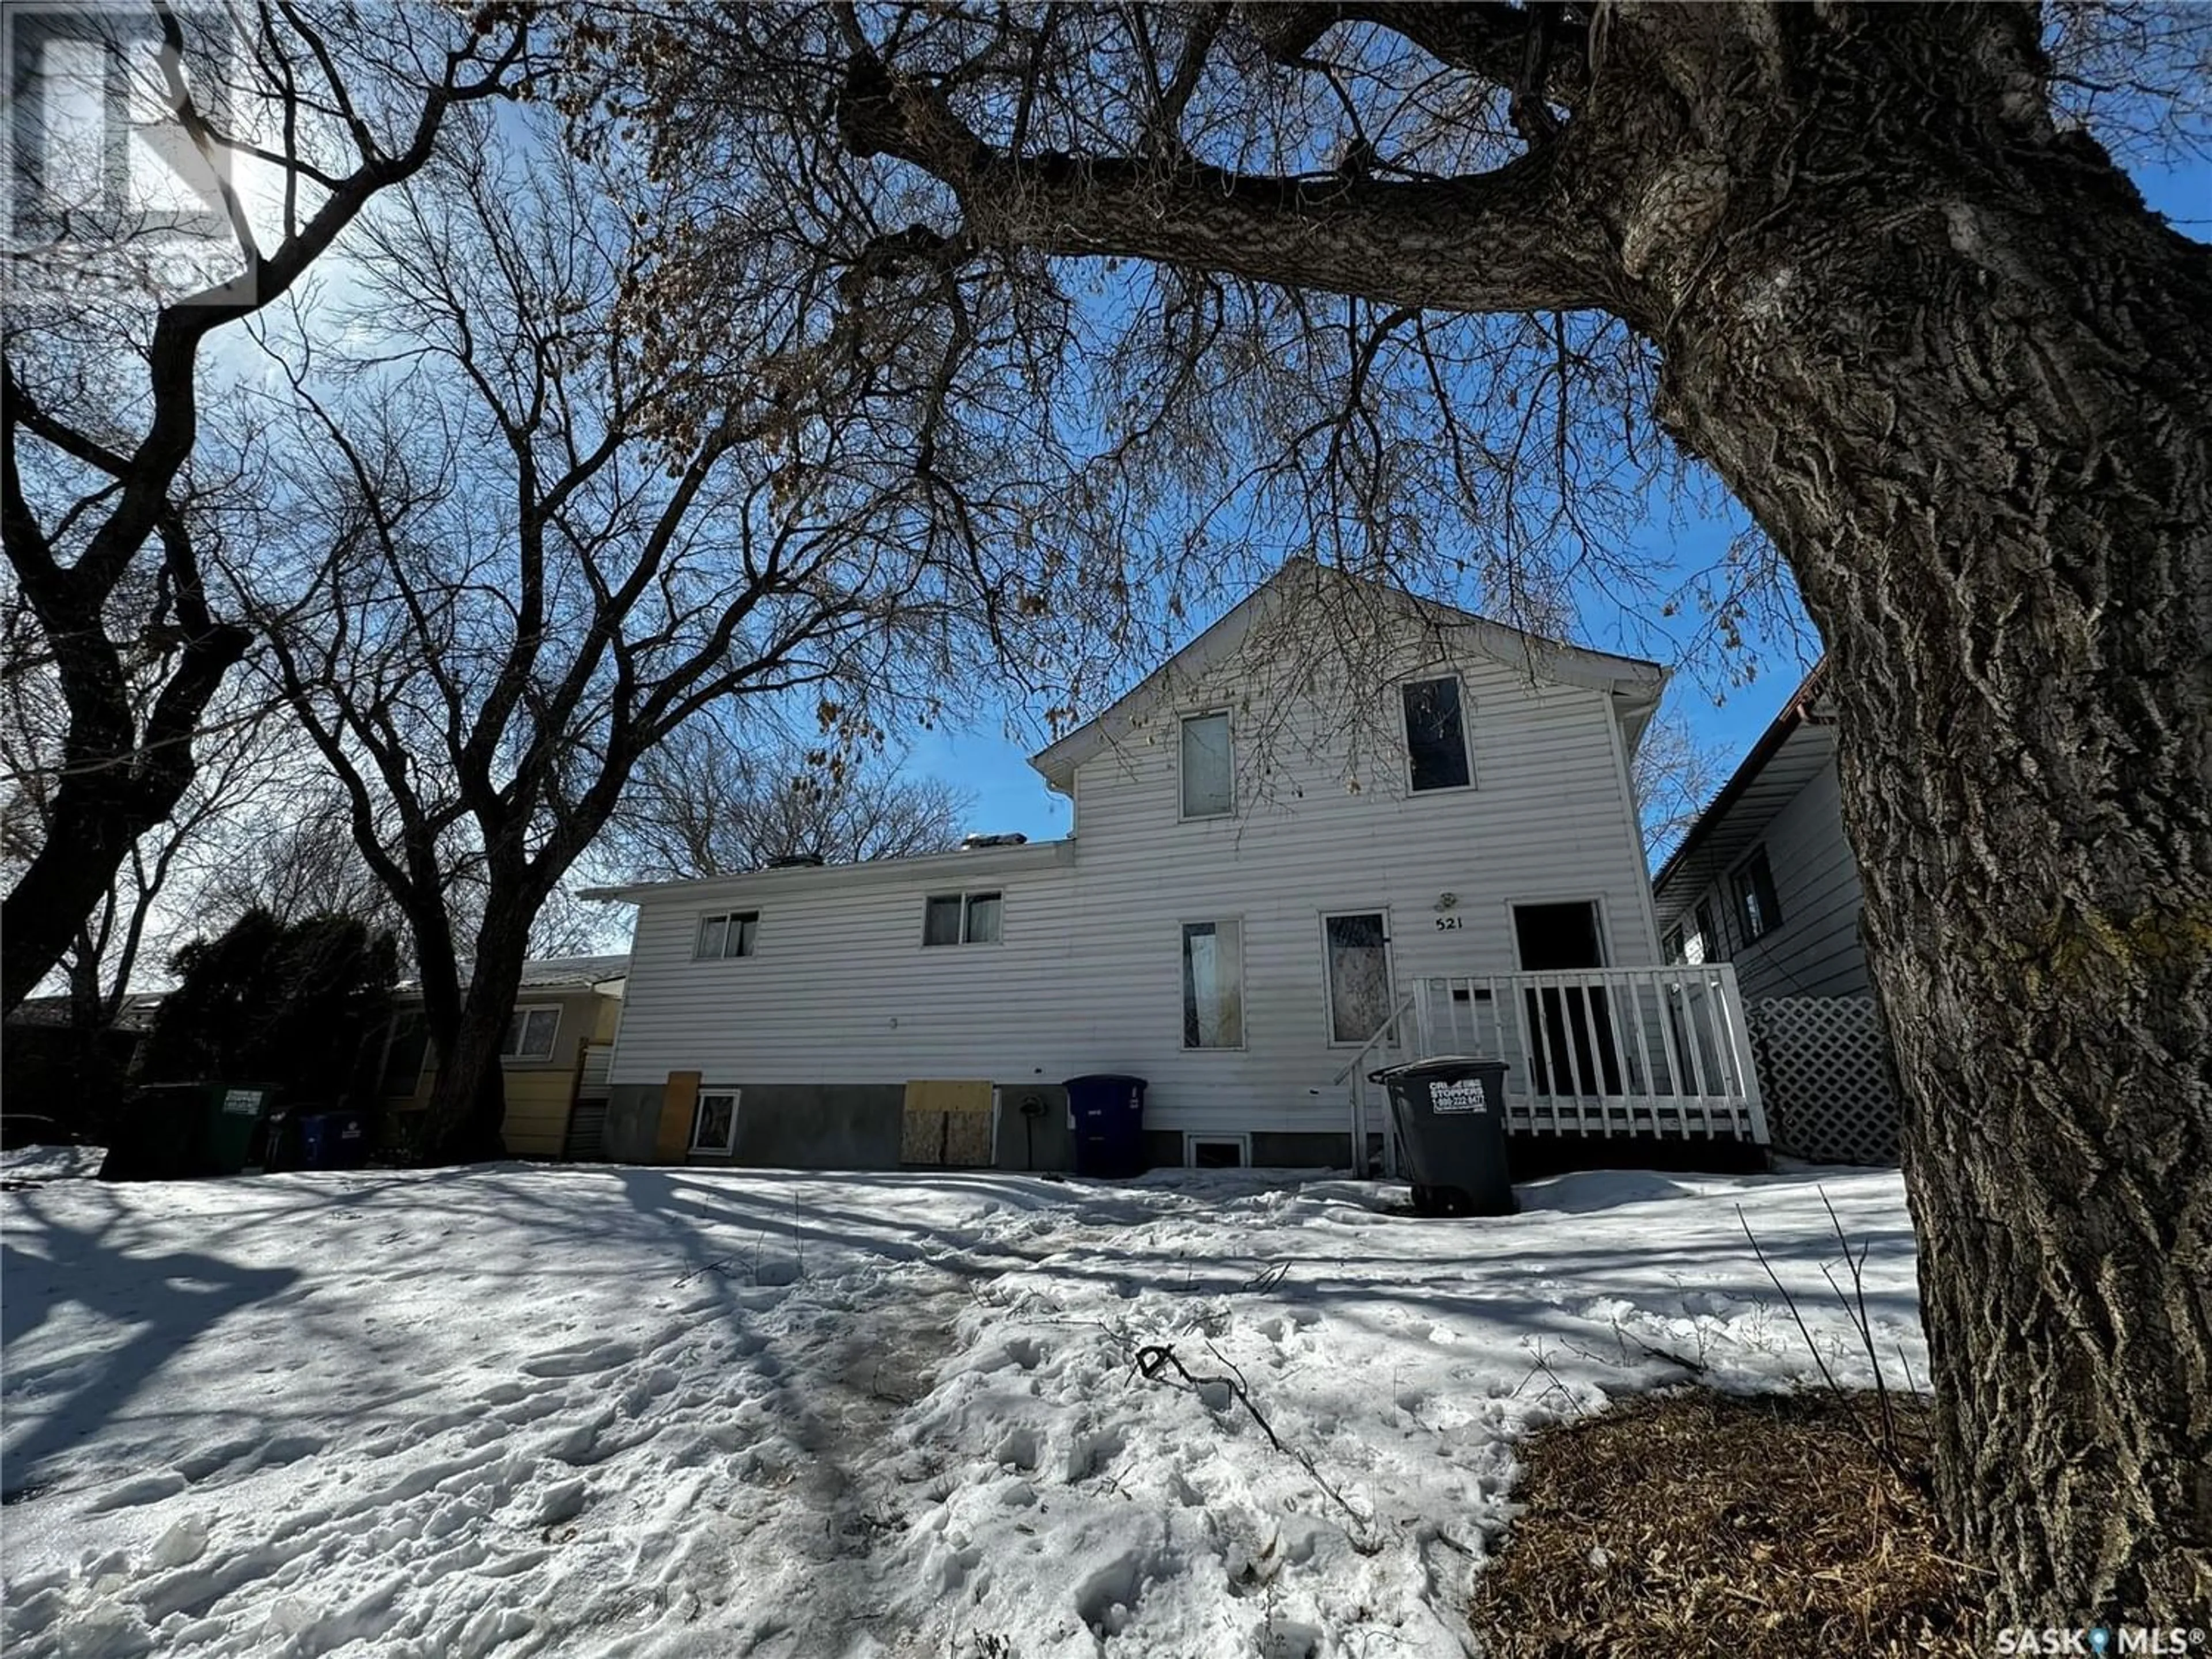 A pic from exterior of the house or condo for 521 S AVENUE S, Saskatoon Saskatchewan S7M3A5